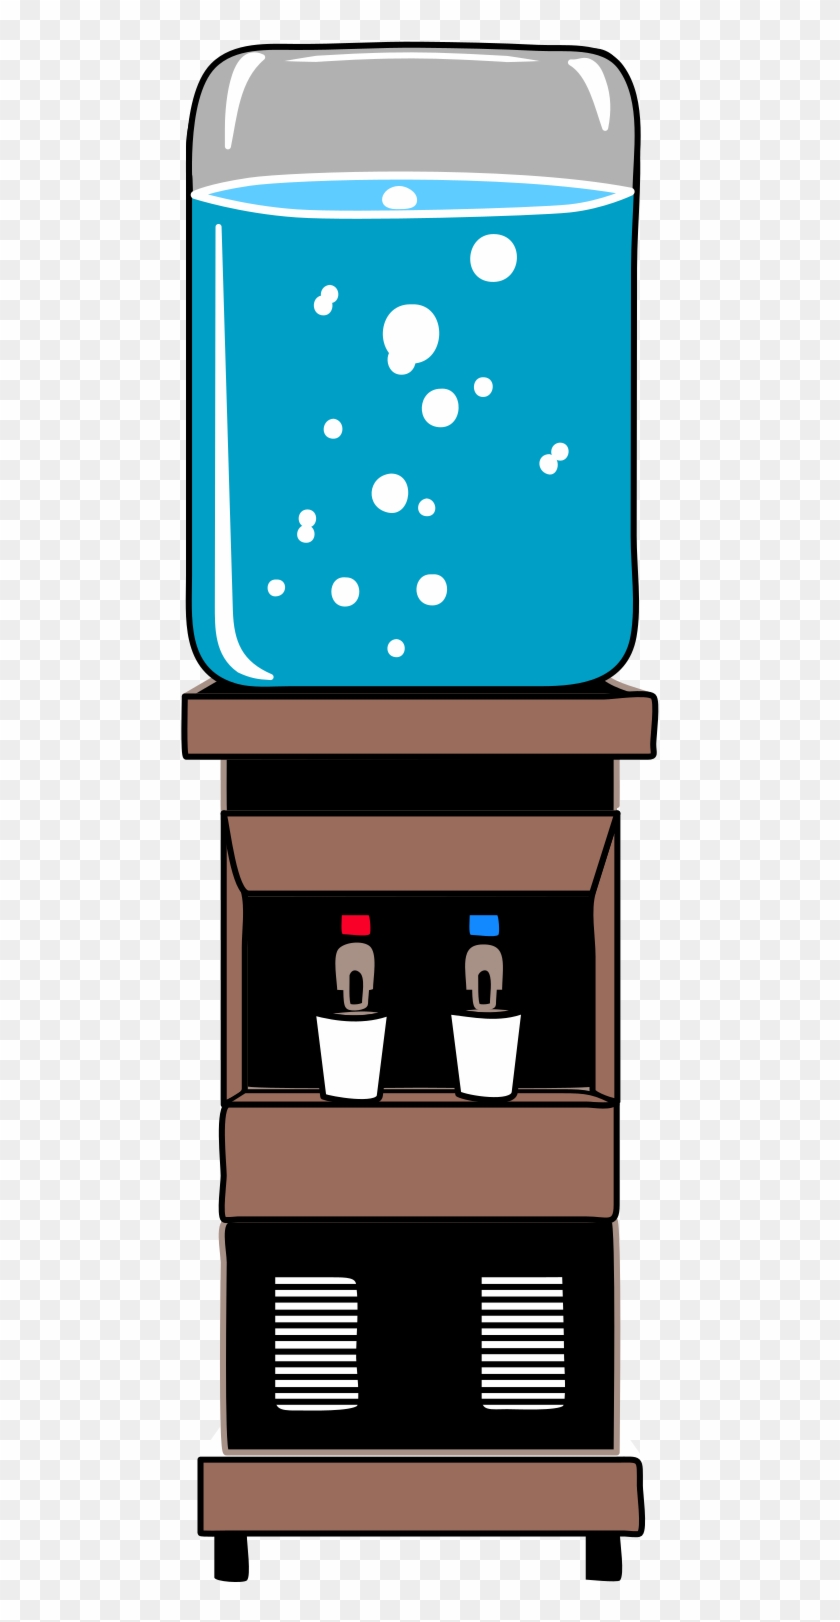 This Image Rendered As Png In Other Widths - Water Cooler Clipart.